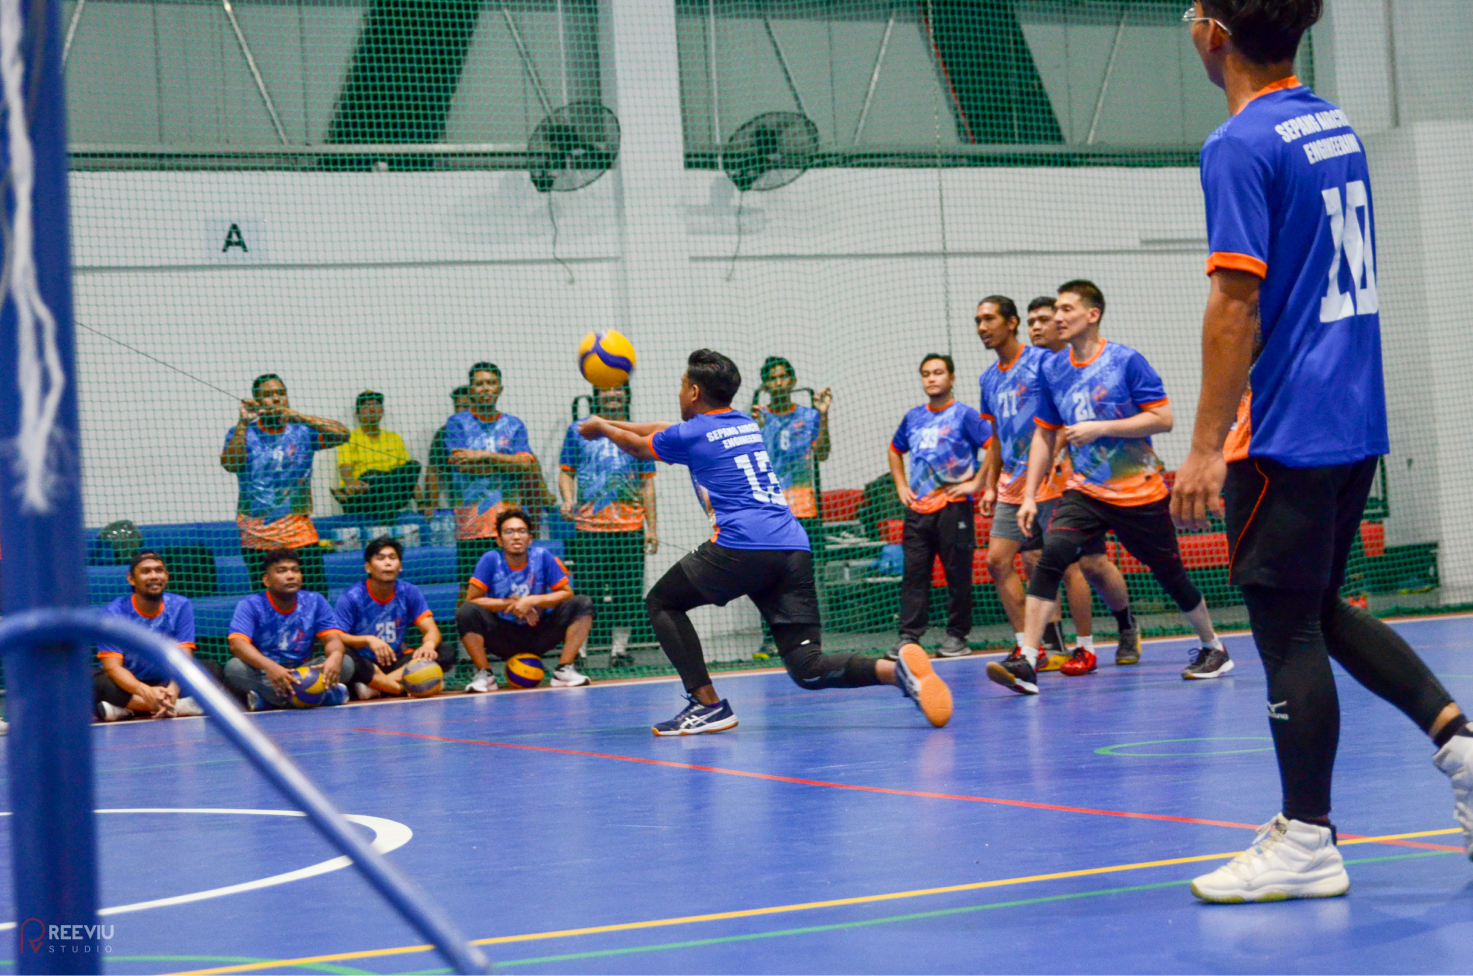 Sepang Aircraft Engineering (SAE) recently organised a volleyball friendly match where our colleagues competed against formidable players from Air Selangor. The competition kept the spirits of those who attended high and their adrenaline pumping throughout.  Players from both sides displayed remarkable sportsmanship and teamwork, showcasing the power of collaboration both in and out of the workplace.  What added an extra layer of excitement to the match was the participation of SAE's Managing Director and Airbus Chief Representative for Malaysia, Mr. Burhanudin Noordin Ali, as one of the players. This not only highlighted SAE's commitment to fostering a close-knit and inclusive environment, but also emphasised the importance of leading by example.  The volleyball event was more than just a game; it was also a reminder that unity and friendly competition can strengthen bonds and boost employee morale, and contribute to a more harmonious work environment. The SAE team can't wait to participate in more of such e